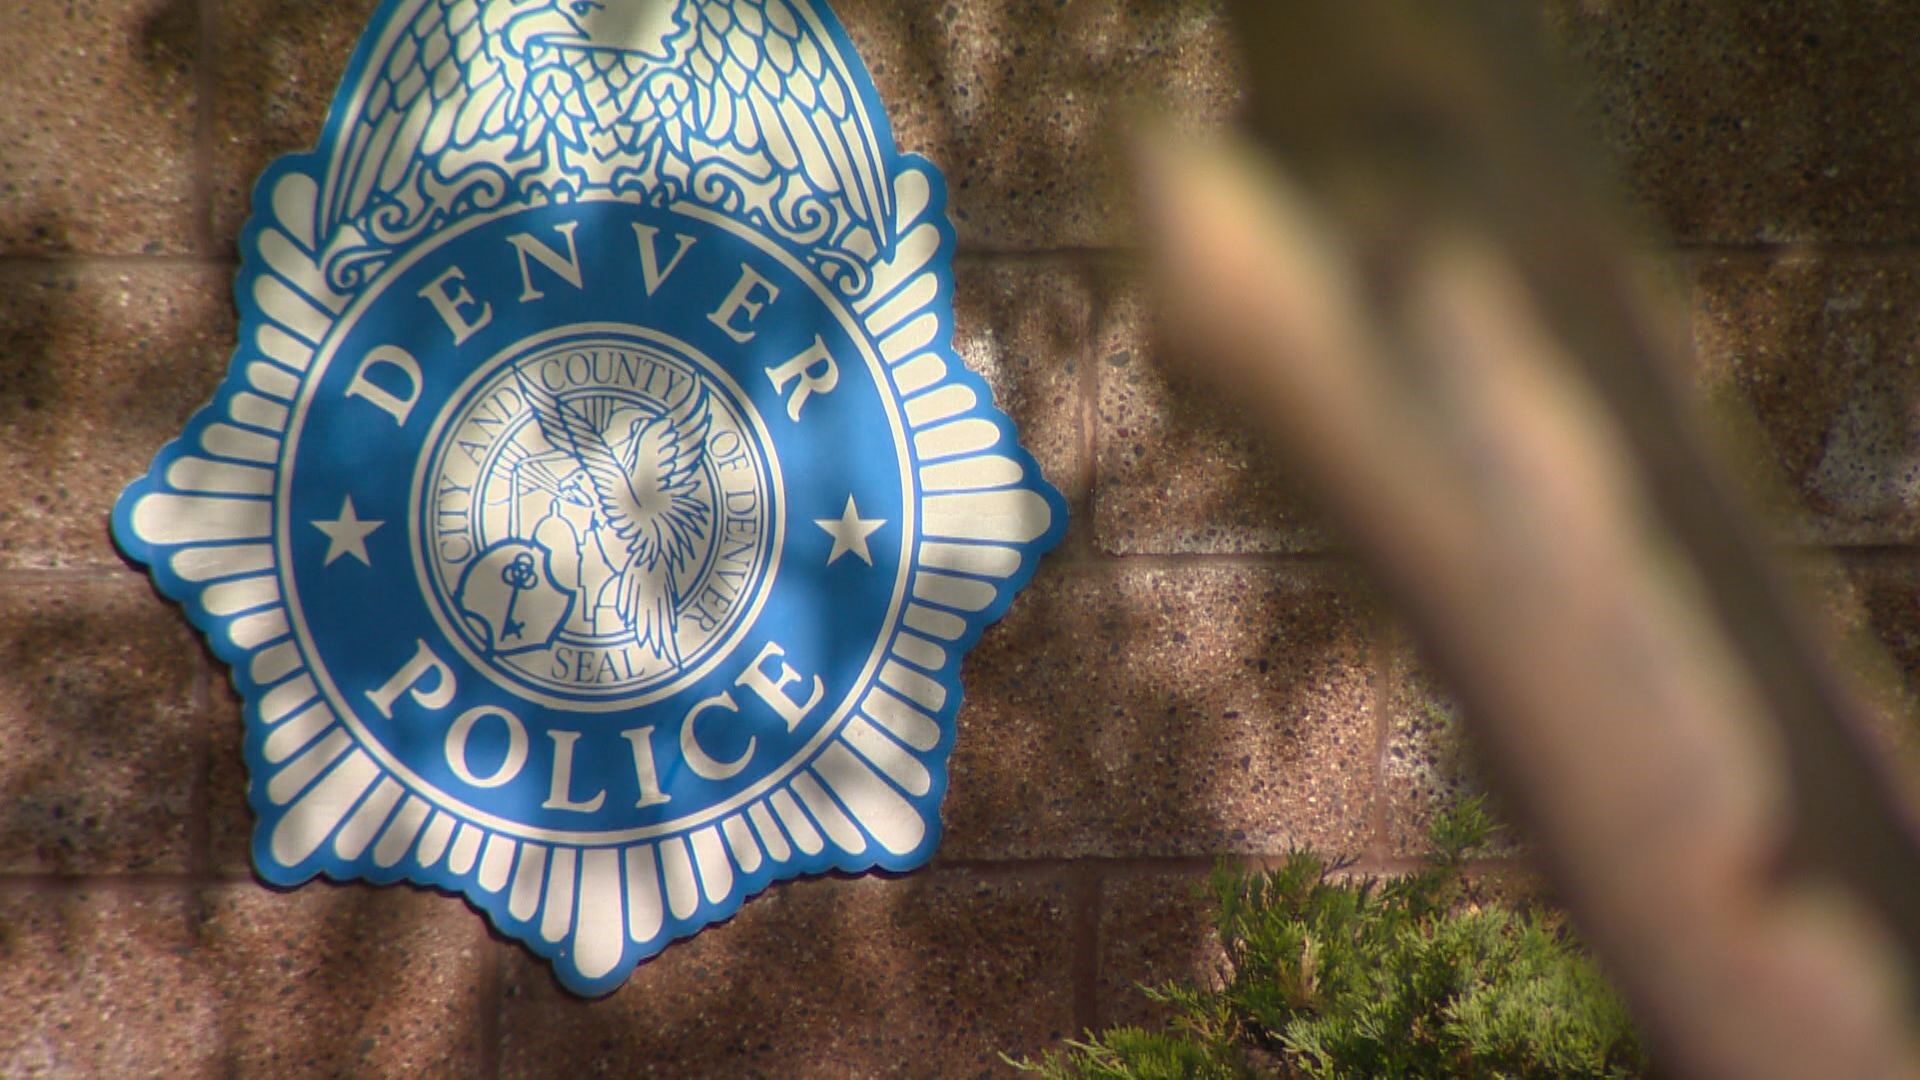 There is a community group responsible for reimaging law enforcement in Denver, but the officers left the group.